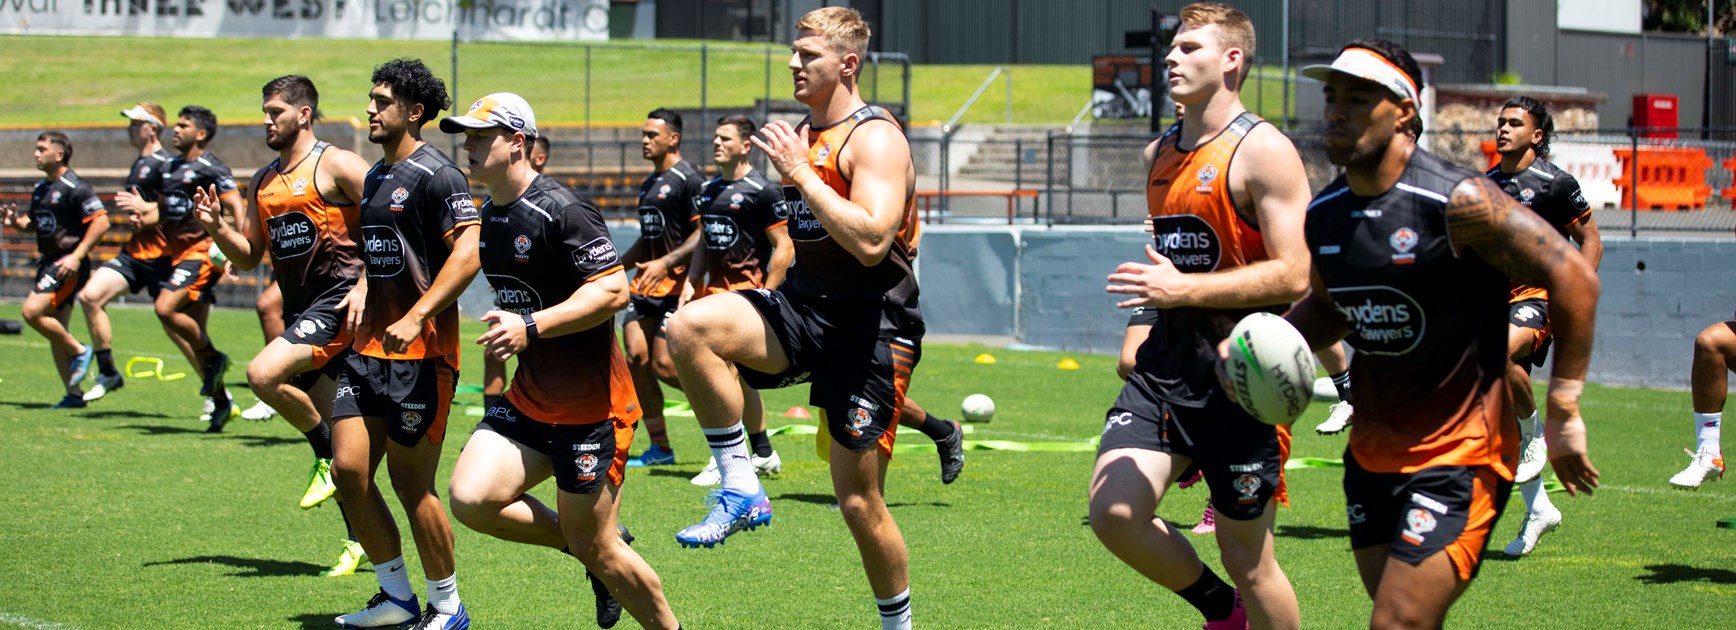 Members Only: Open training session